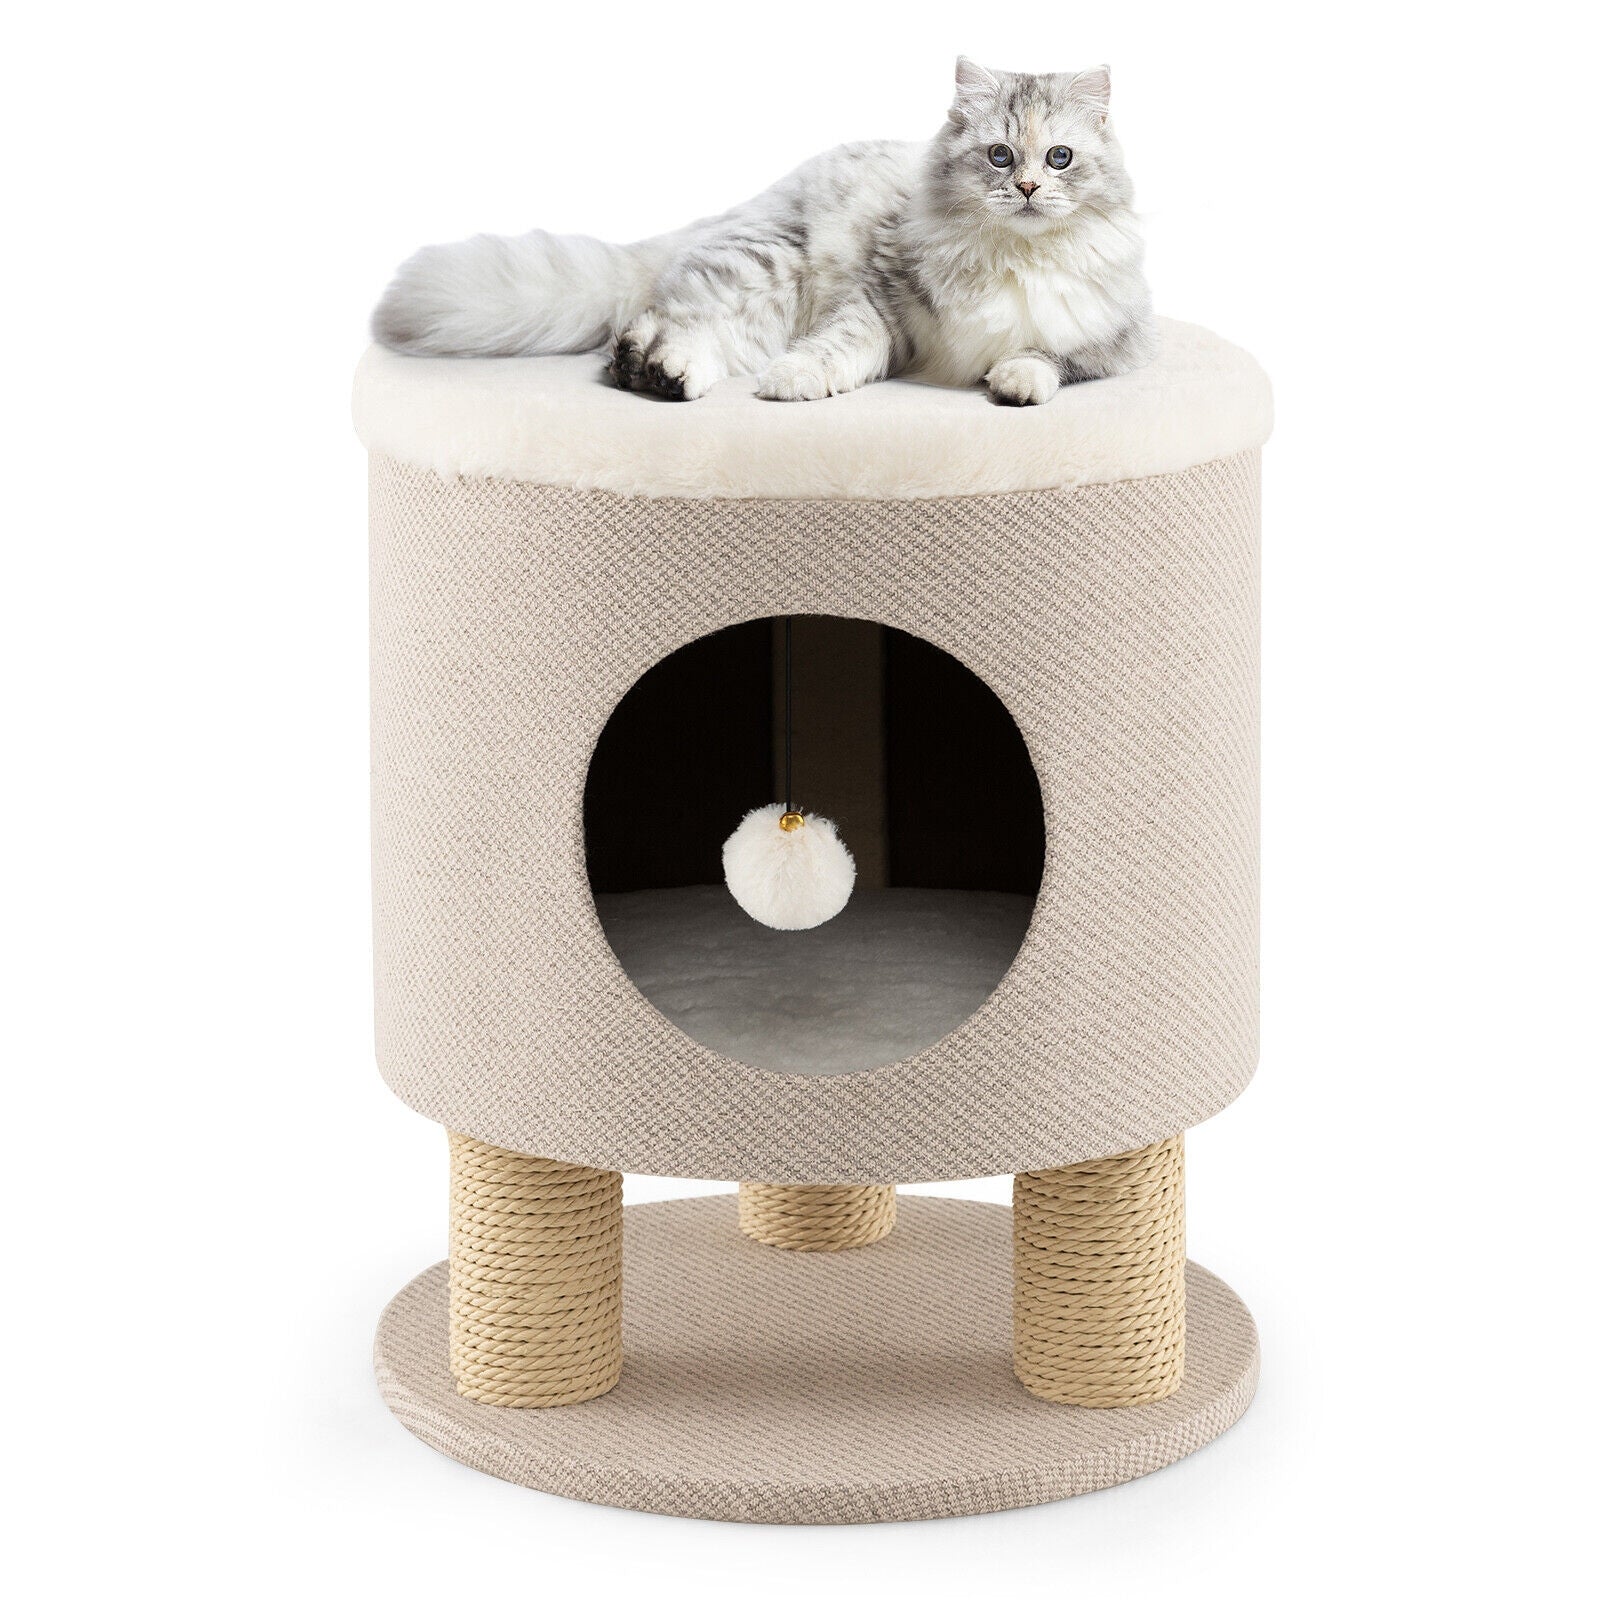 3-in-1 Cat Condo Stool Kitty Bed with Scratching Posts and Plush Ball Toy, Beige